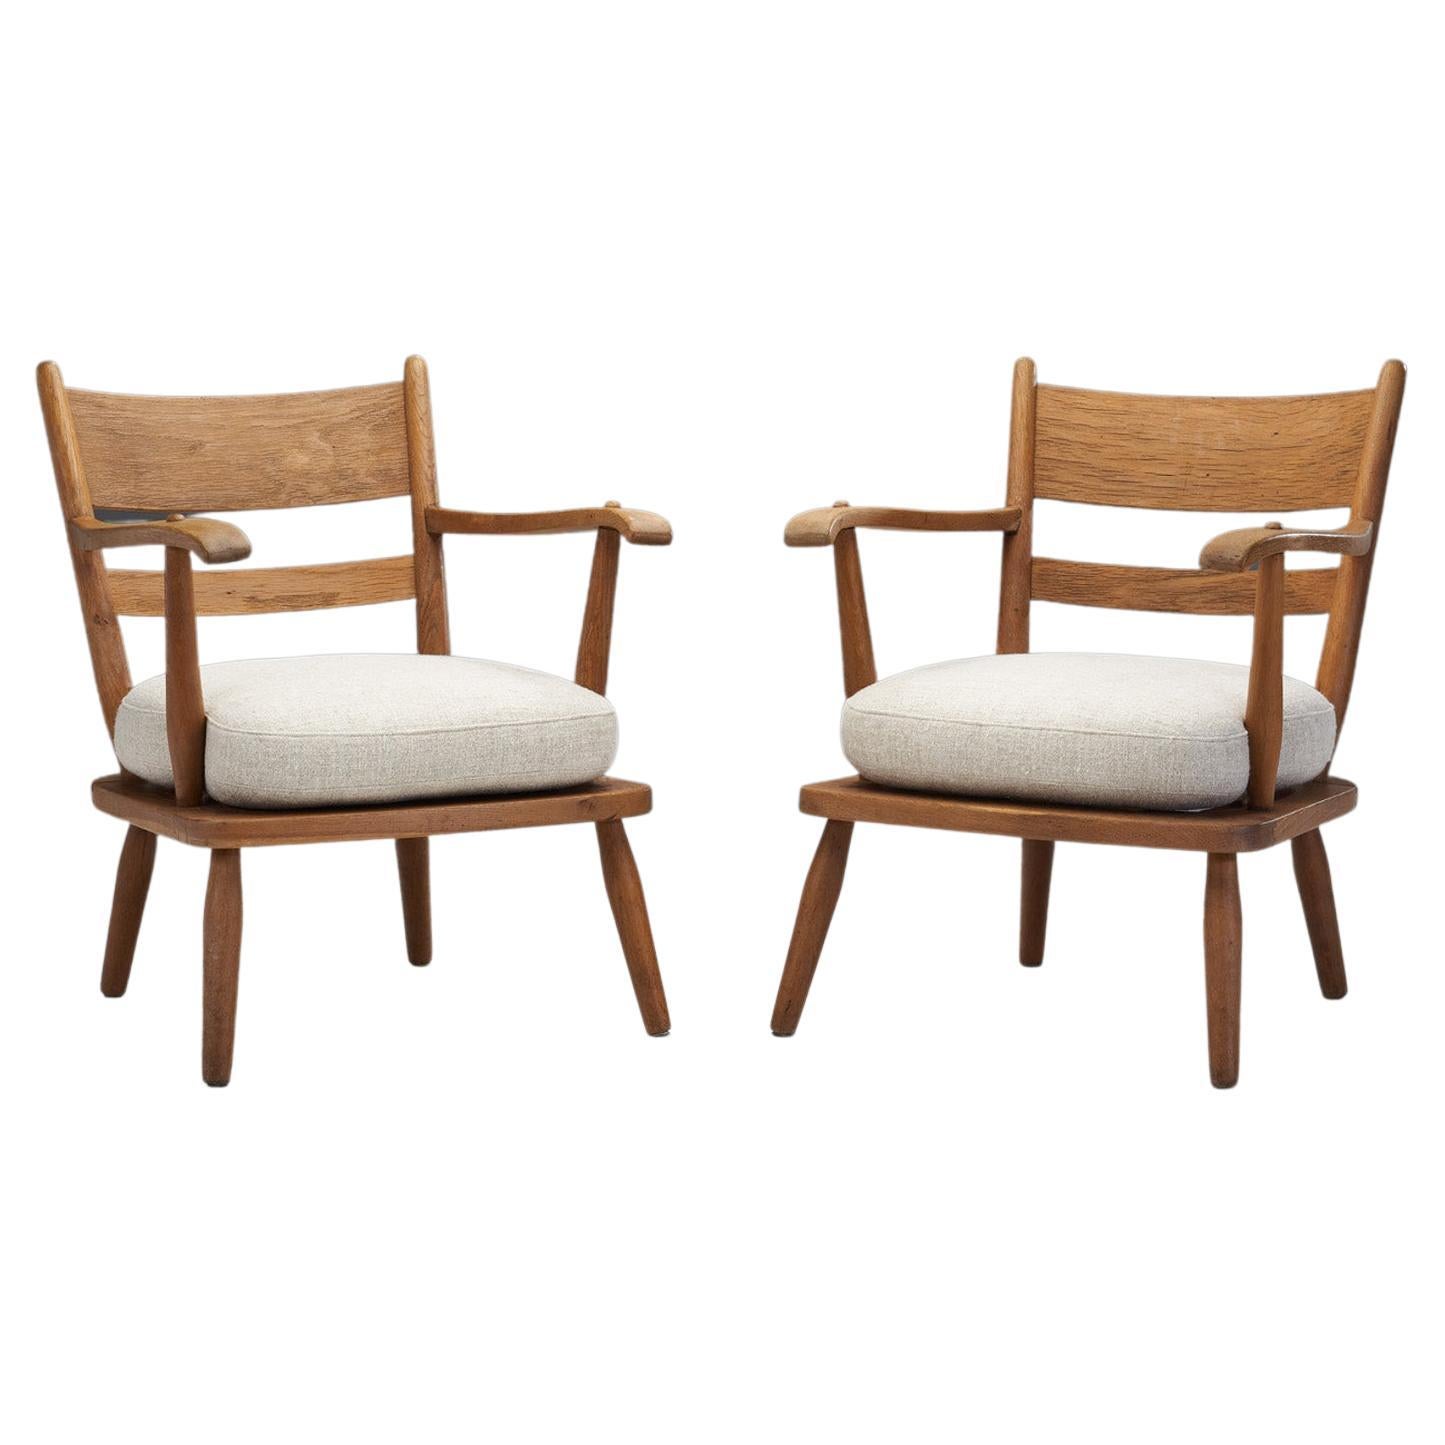 Danish Cabinetmaker Oak Armchairs with Upholstered Cushions, Denmark 1940s For Sale